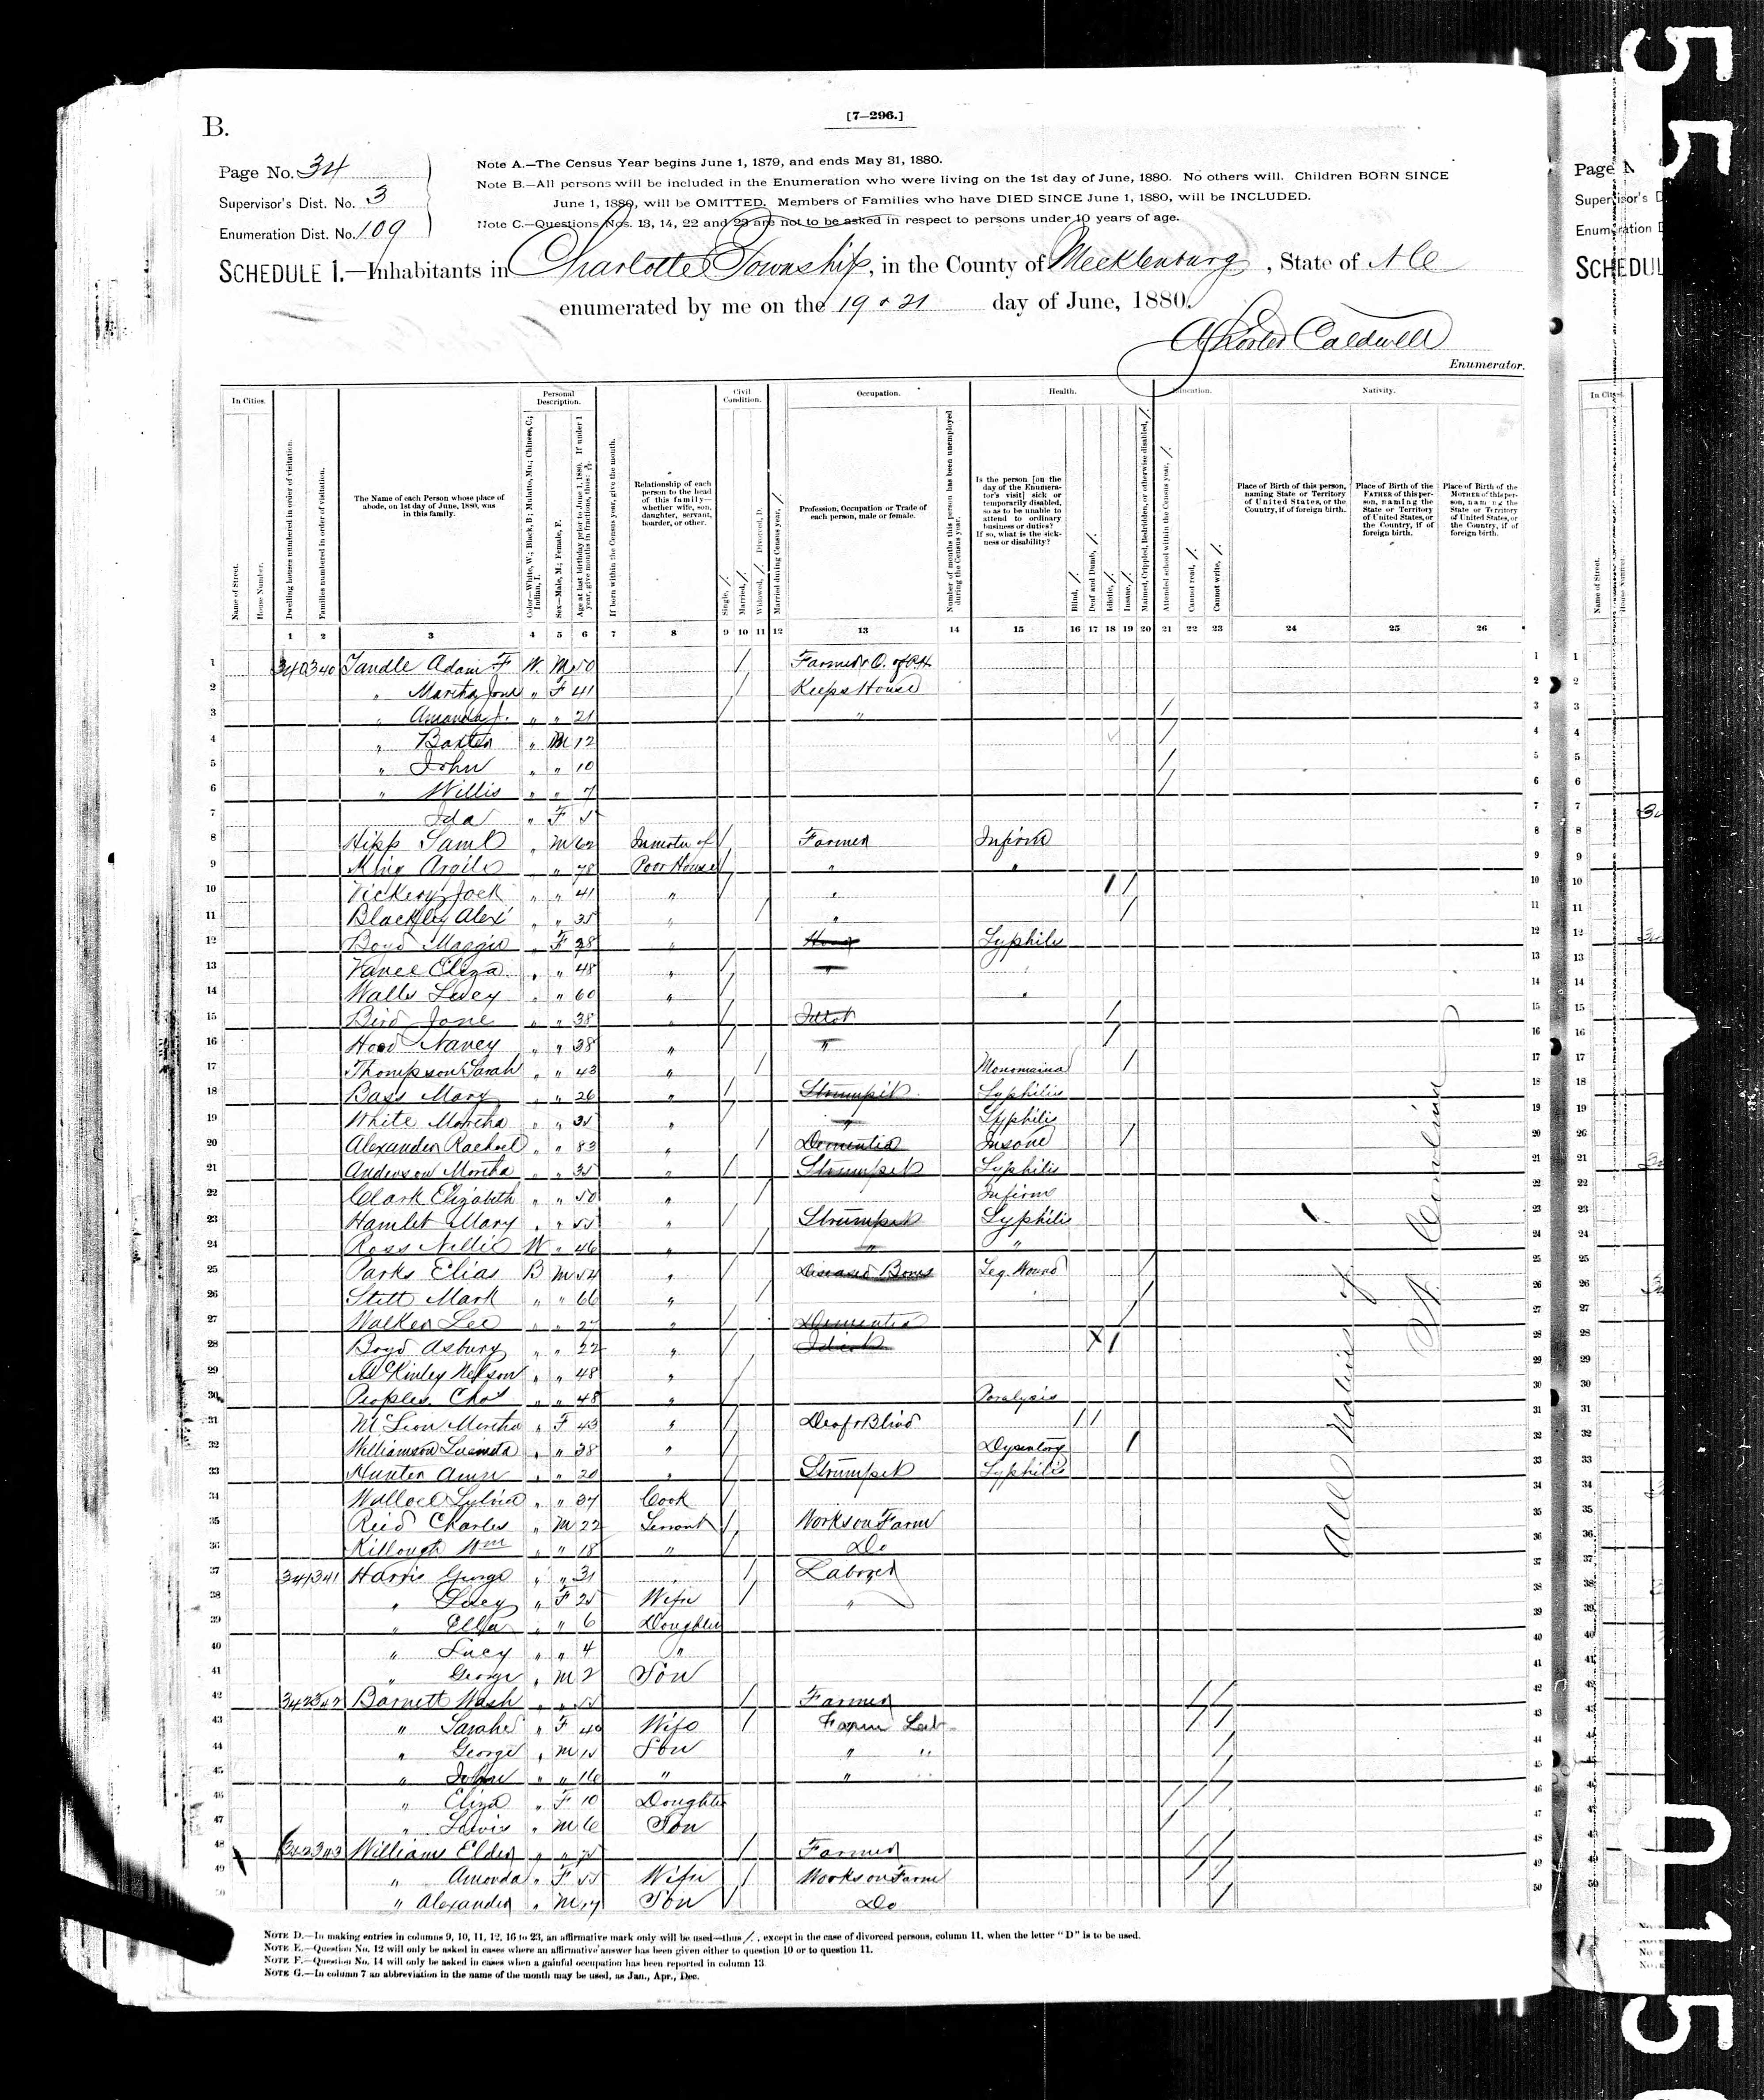 1880 Census, showing Poor House in Mecklenburg County